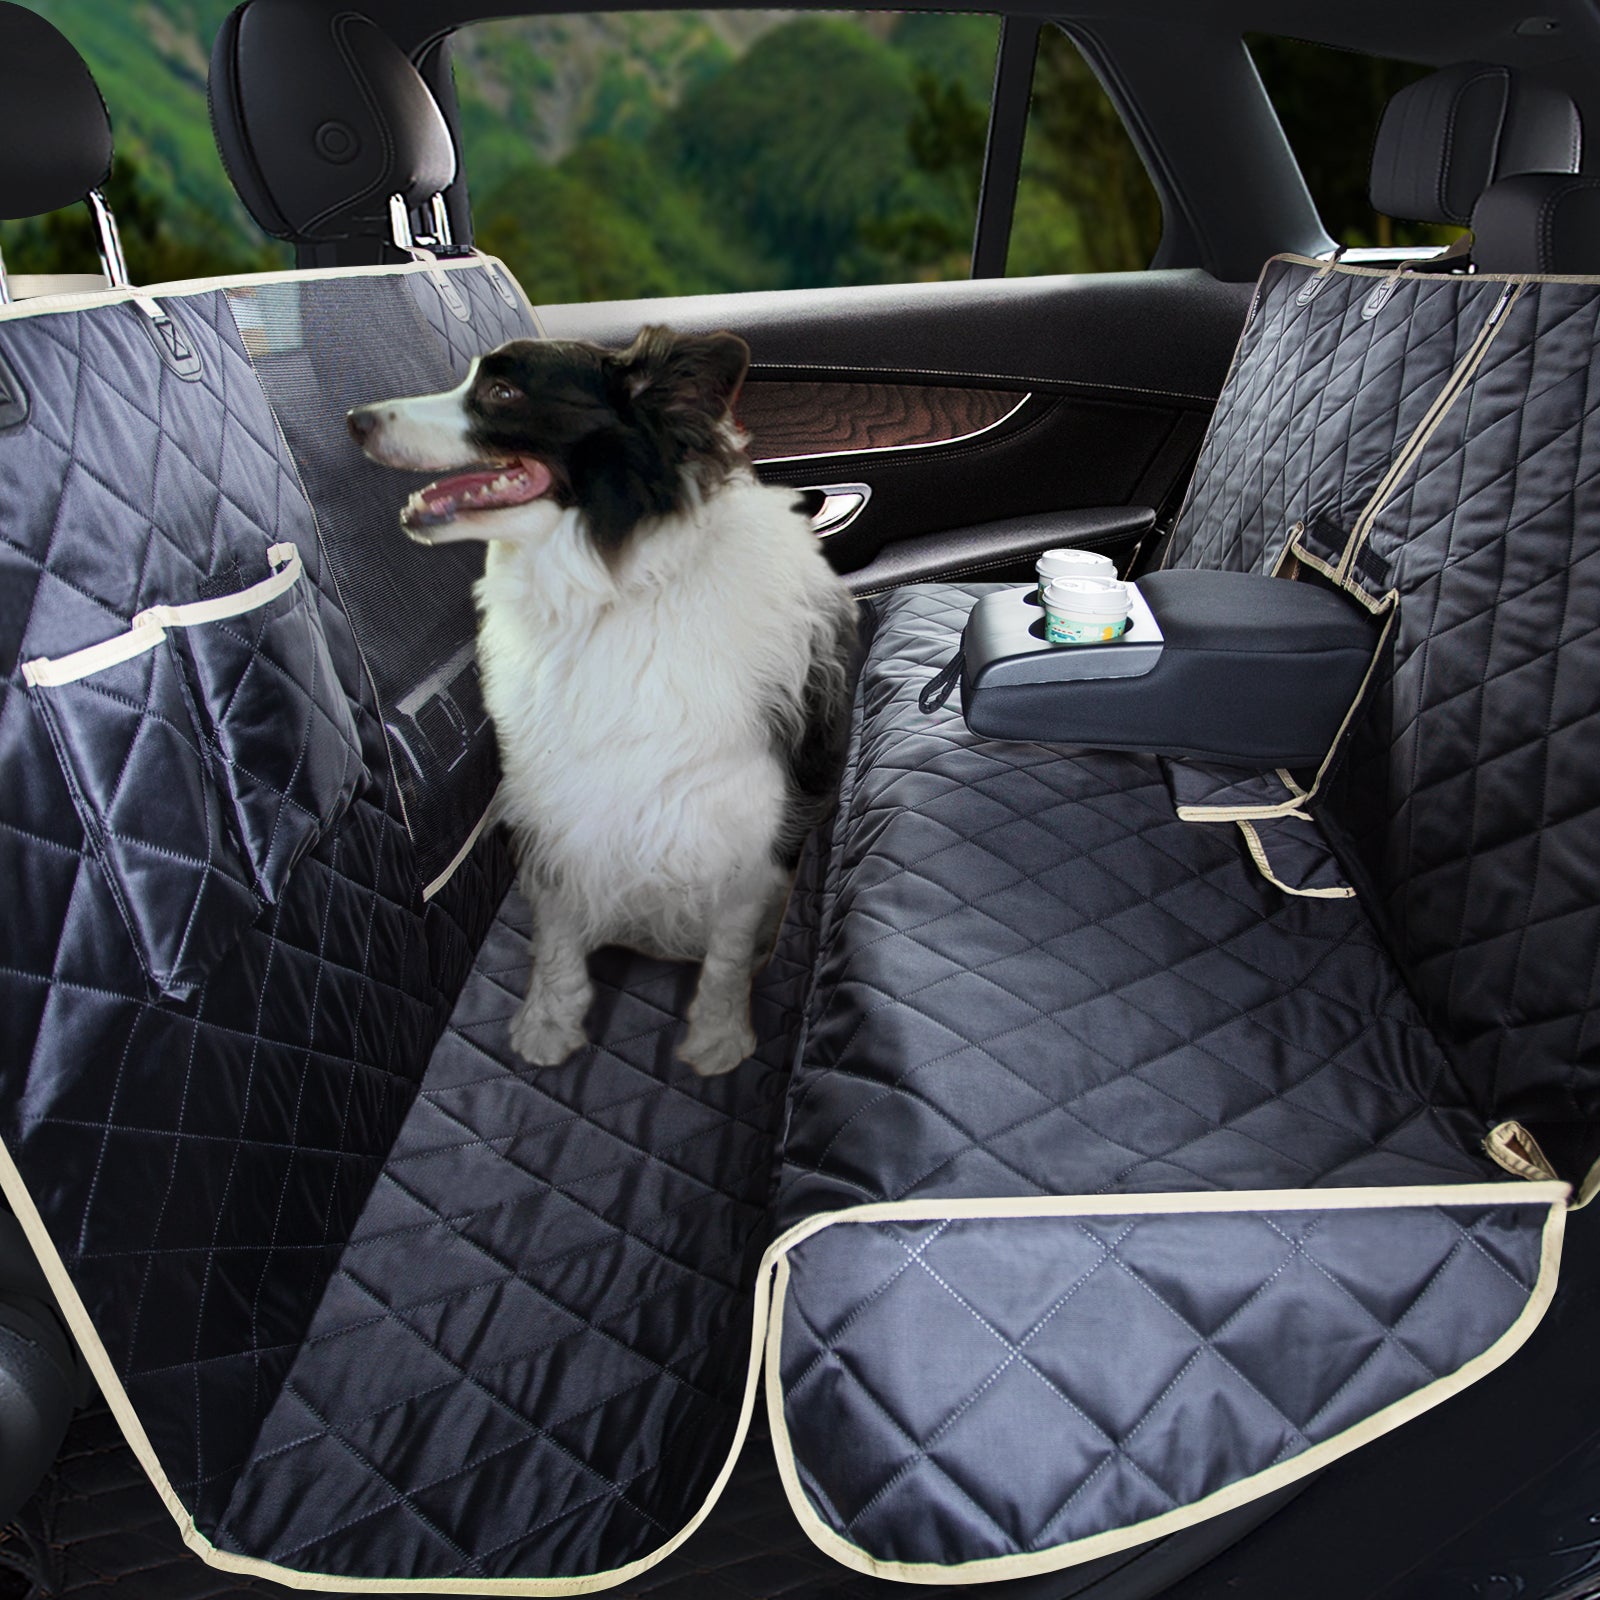 Lassie 4 in 1 Floor Dog Hammock for Universal Size,100% Waterproof Backseat Cover Dog Car Seat Covers for Back Seat with Mesh Window for Sedans, Bench Protector for Cars, SUVs and Trucks etc